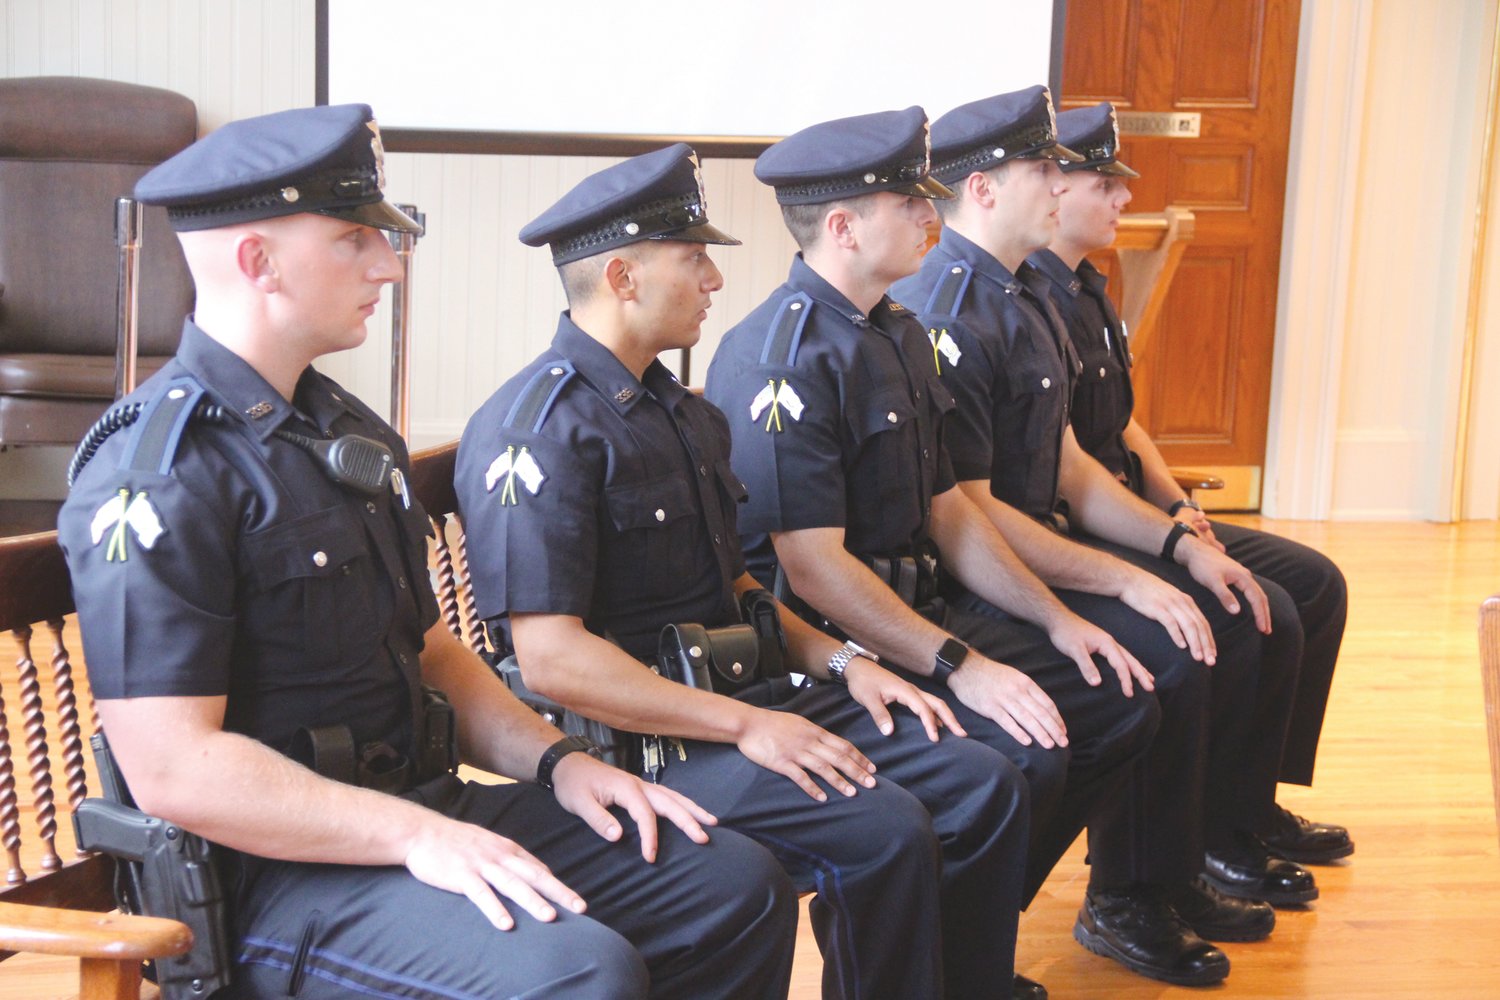 NEW TO THE FORCE: Probationary officers await to be individually recognized and called before the audience and receive their badges as Warwick Police officers.